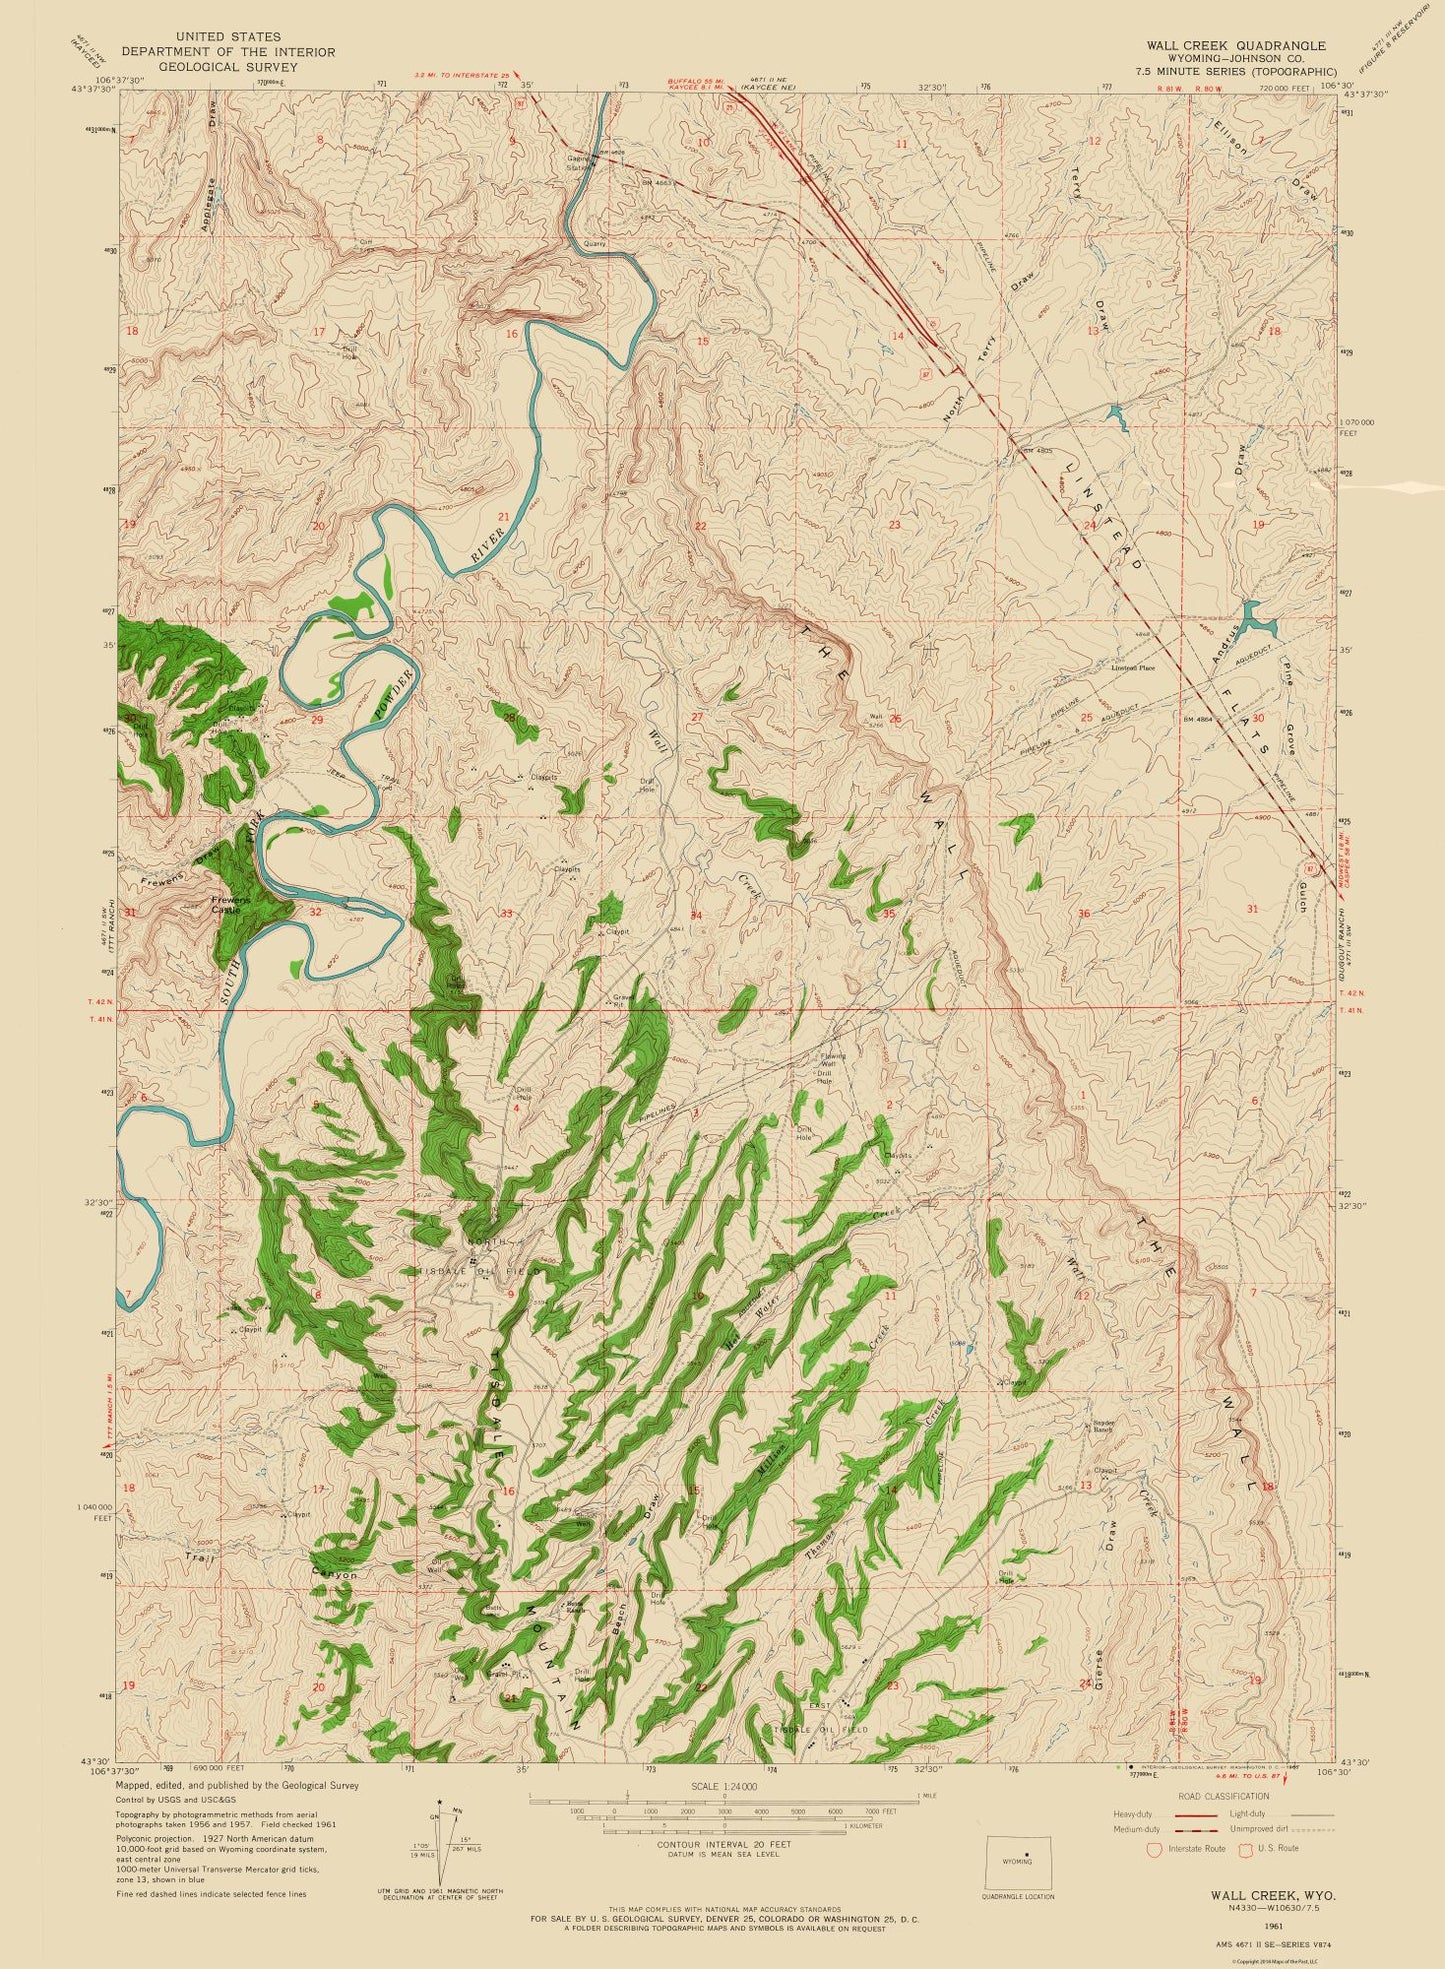 Topographical Map - Wall Creek Wyoming Quad - USGS 1961 - 23 x 31.33 - Vintage Wall Art